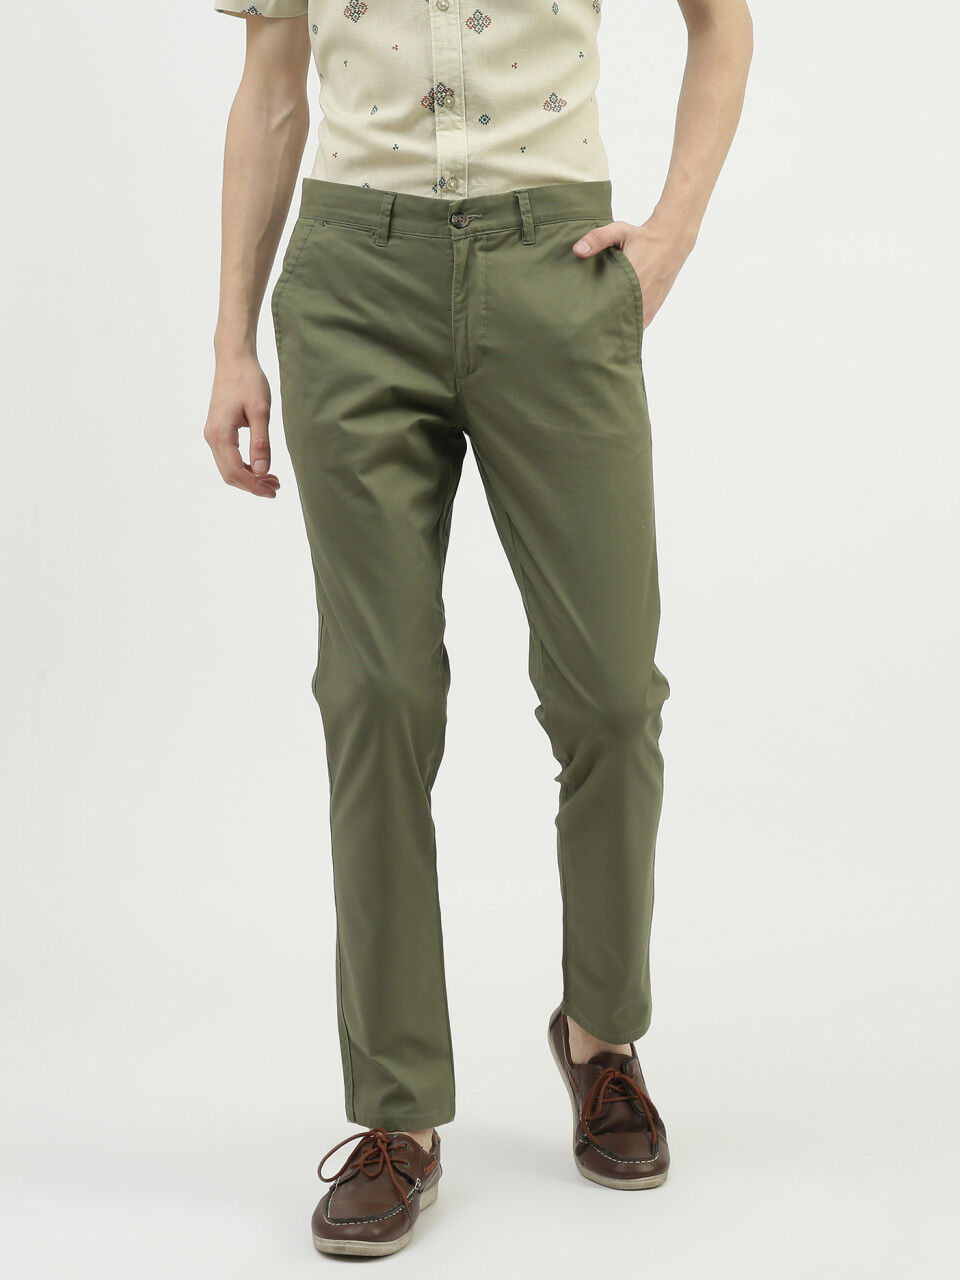 Buy UNITED COLORS OF BENETTON Solid Cotton Stretch Slim Fit Mens Trousers   Shoppers Stop